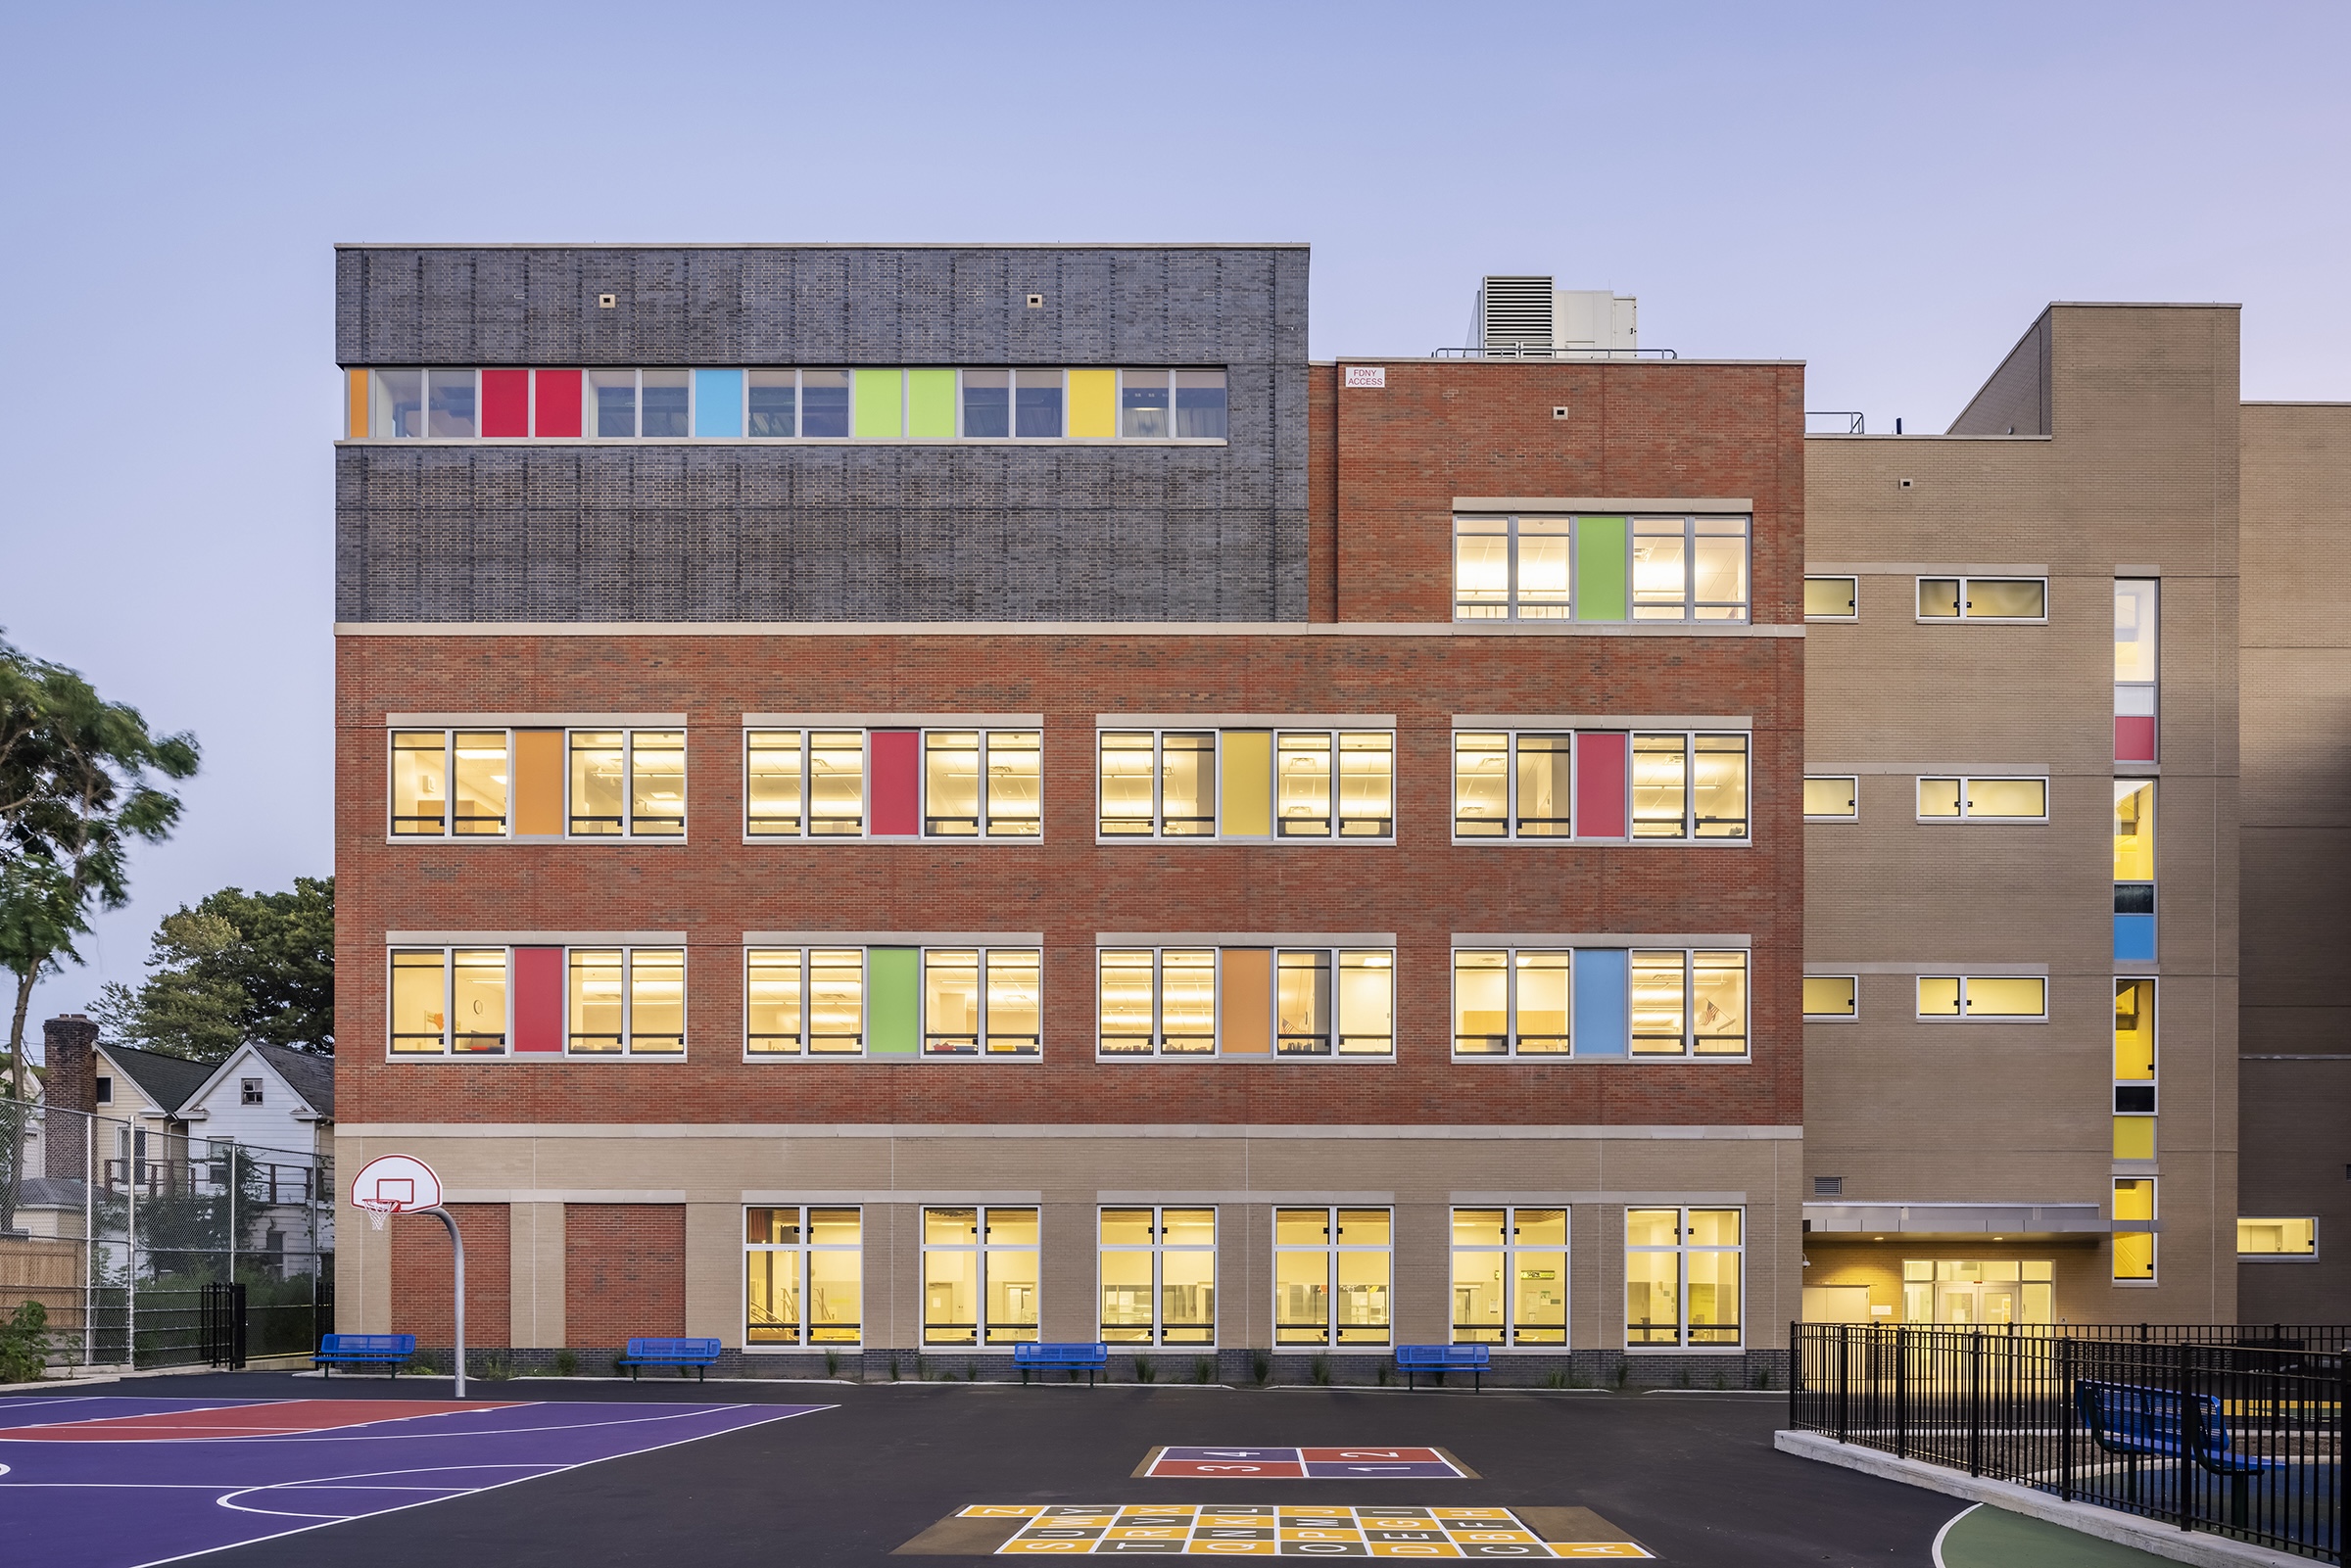 RTKB Architects designed the addition to PS 19X in The Bronx, N.Y., to accommodate 200 more students.